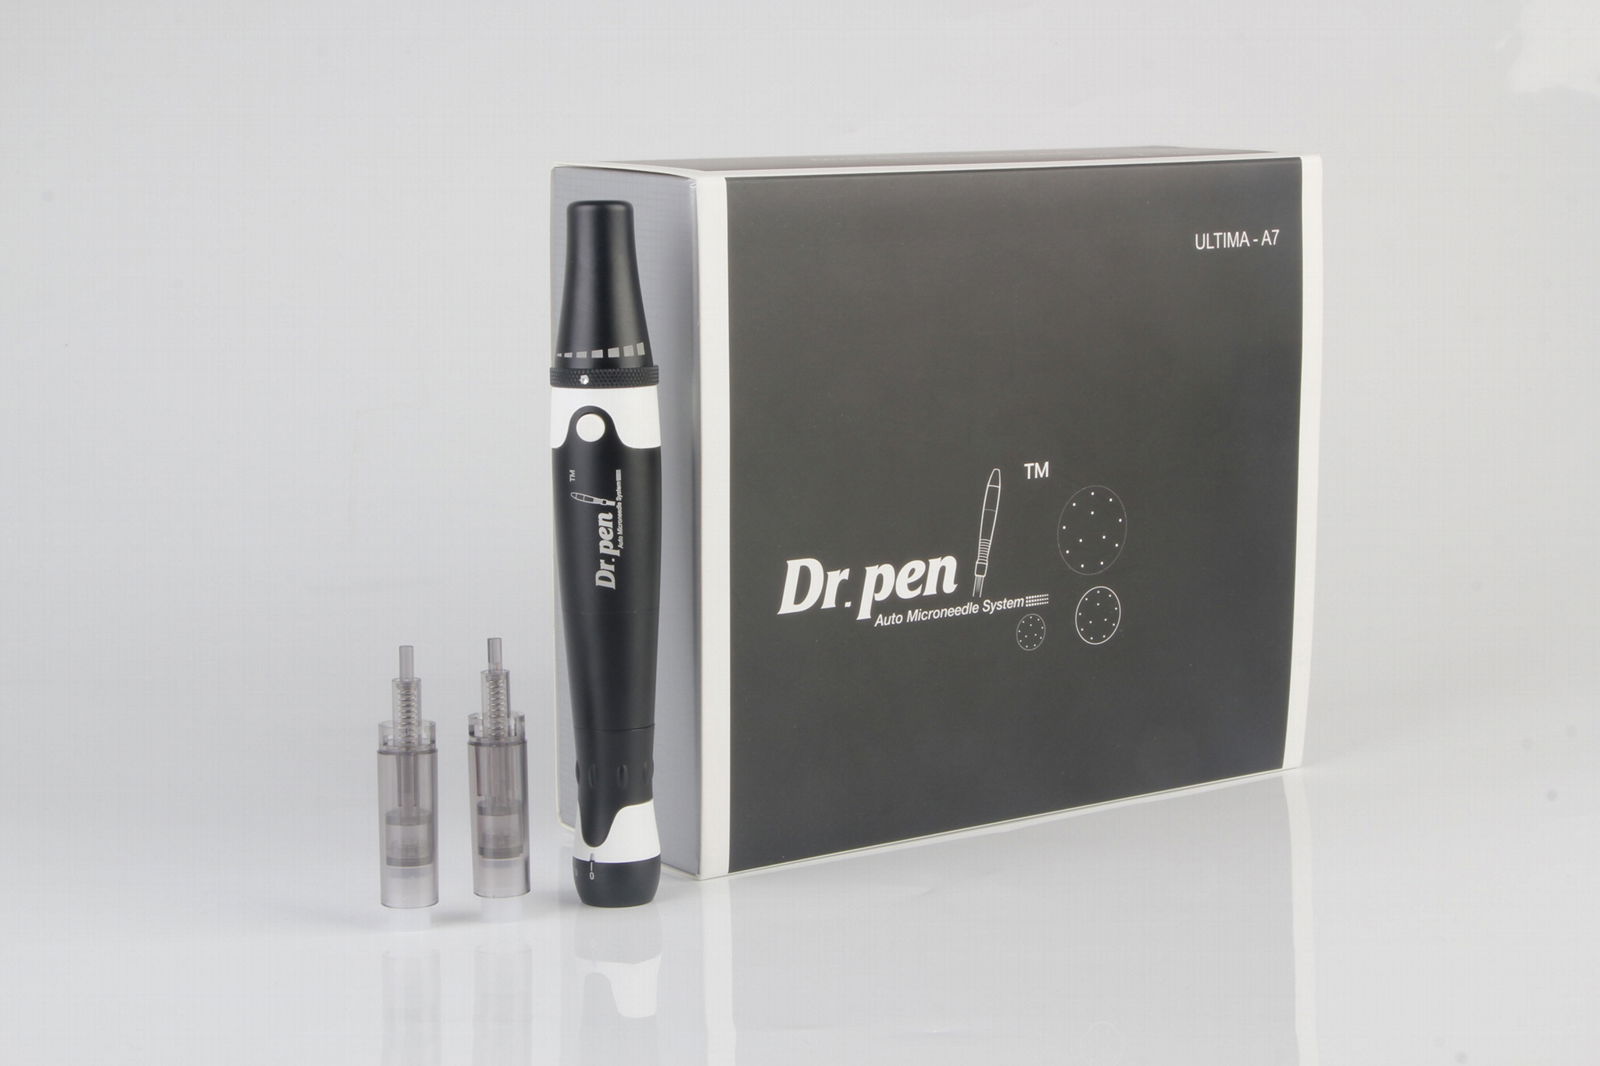 2019 new derma pen A7 for acne removal 2